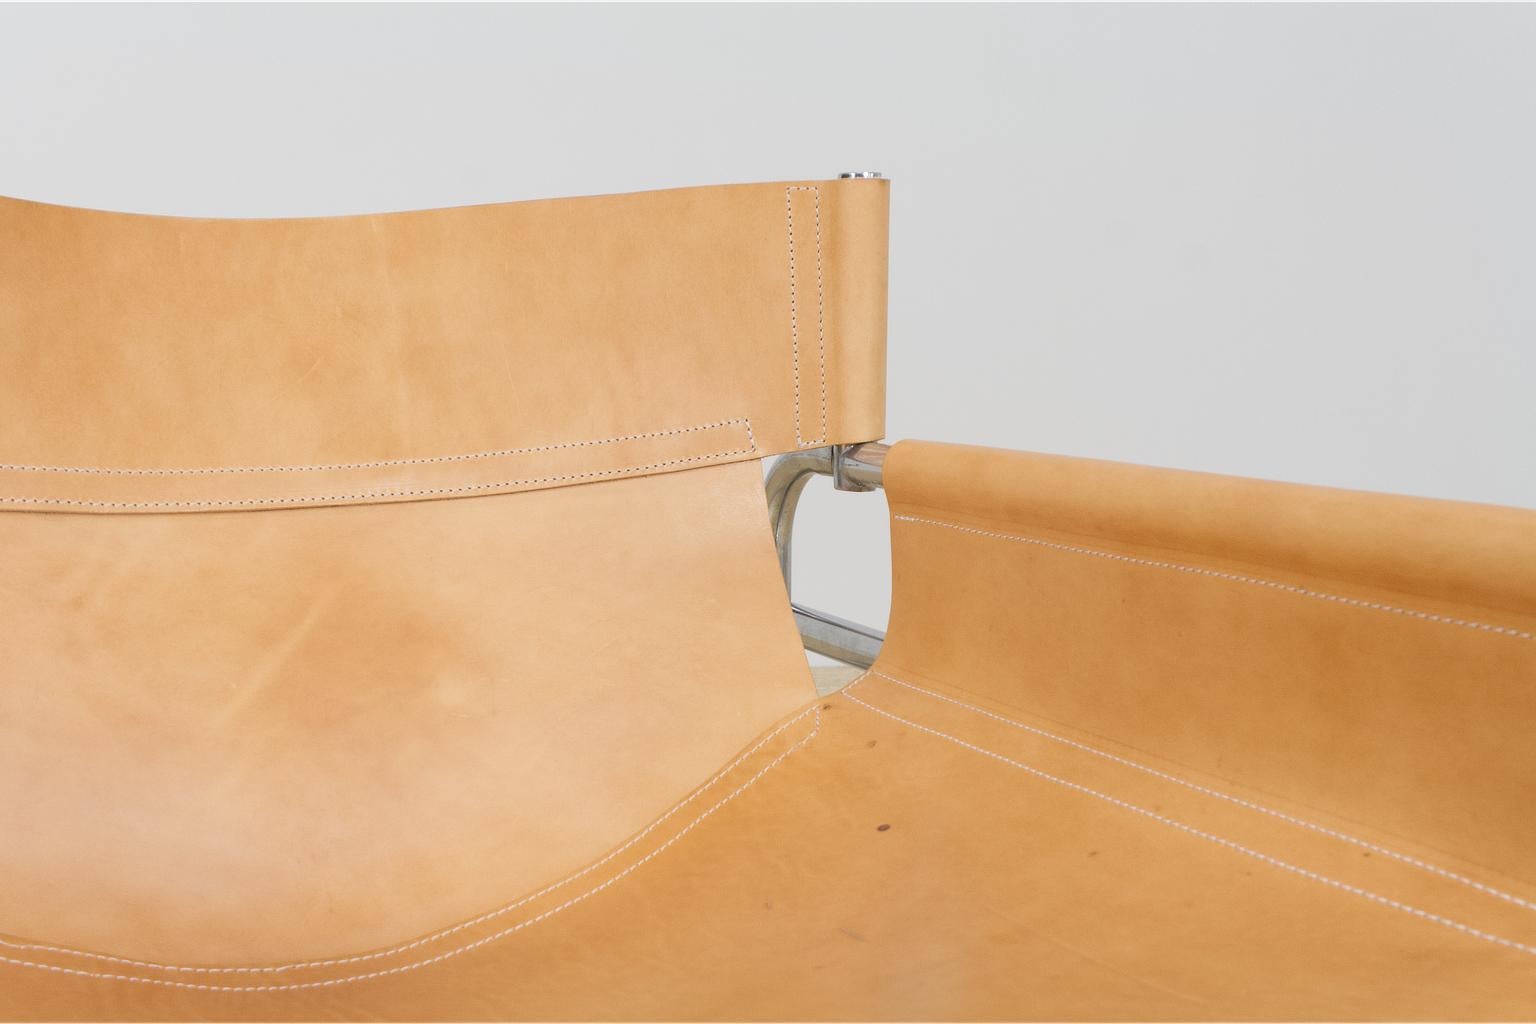 Mid-Century Modernist Lounge Chairs in Saddle Leather by Walter Antonis, 1974 For Sale 2